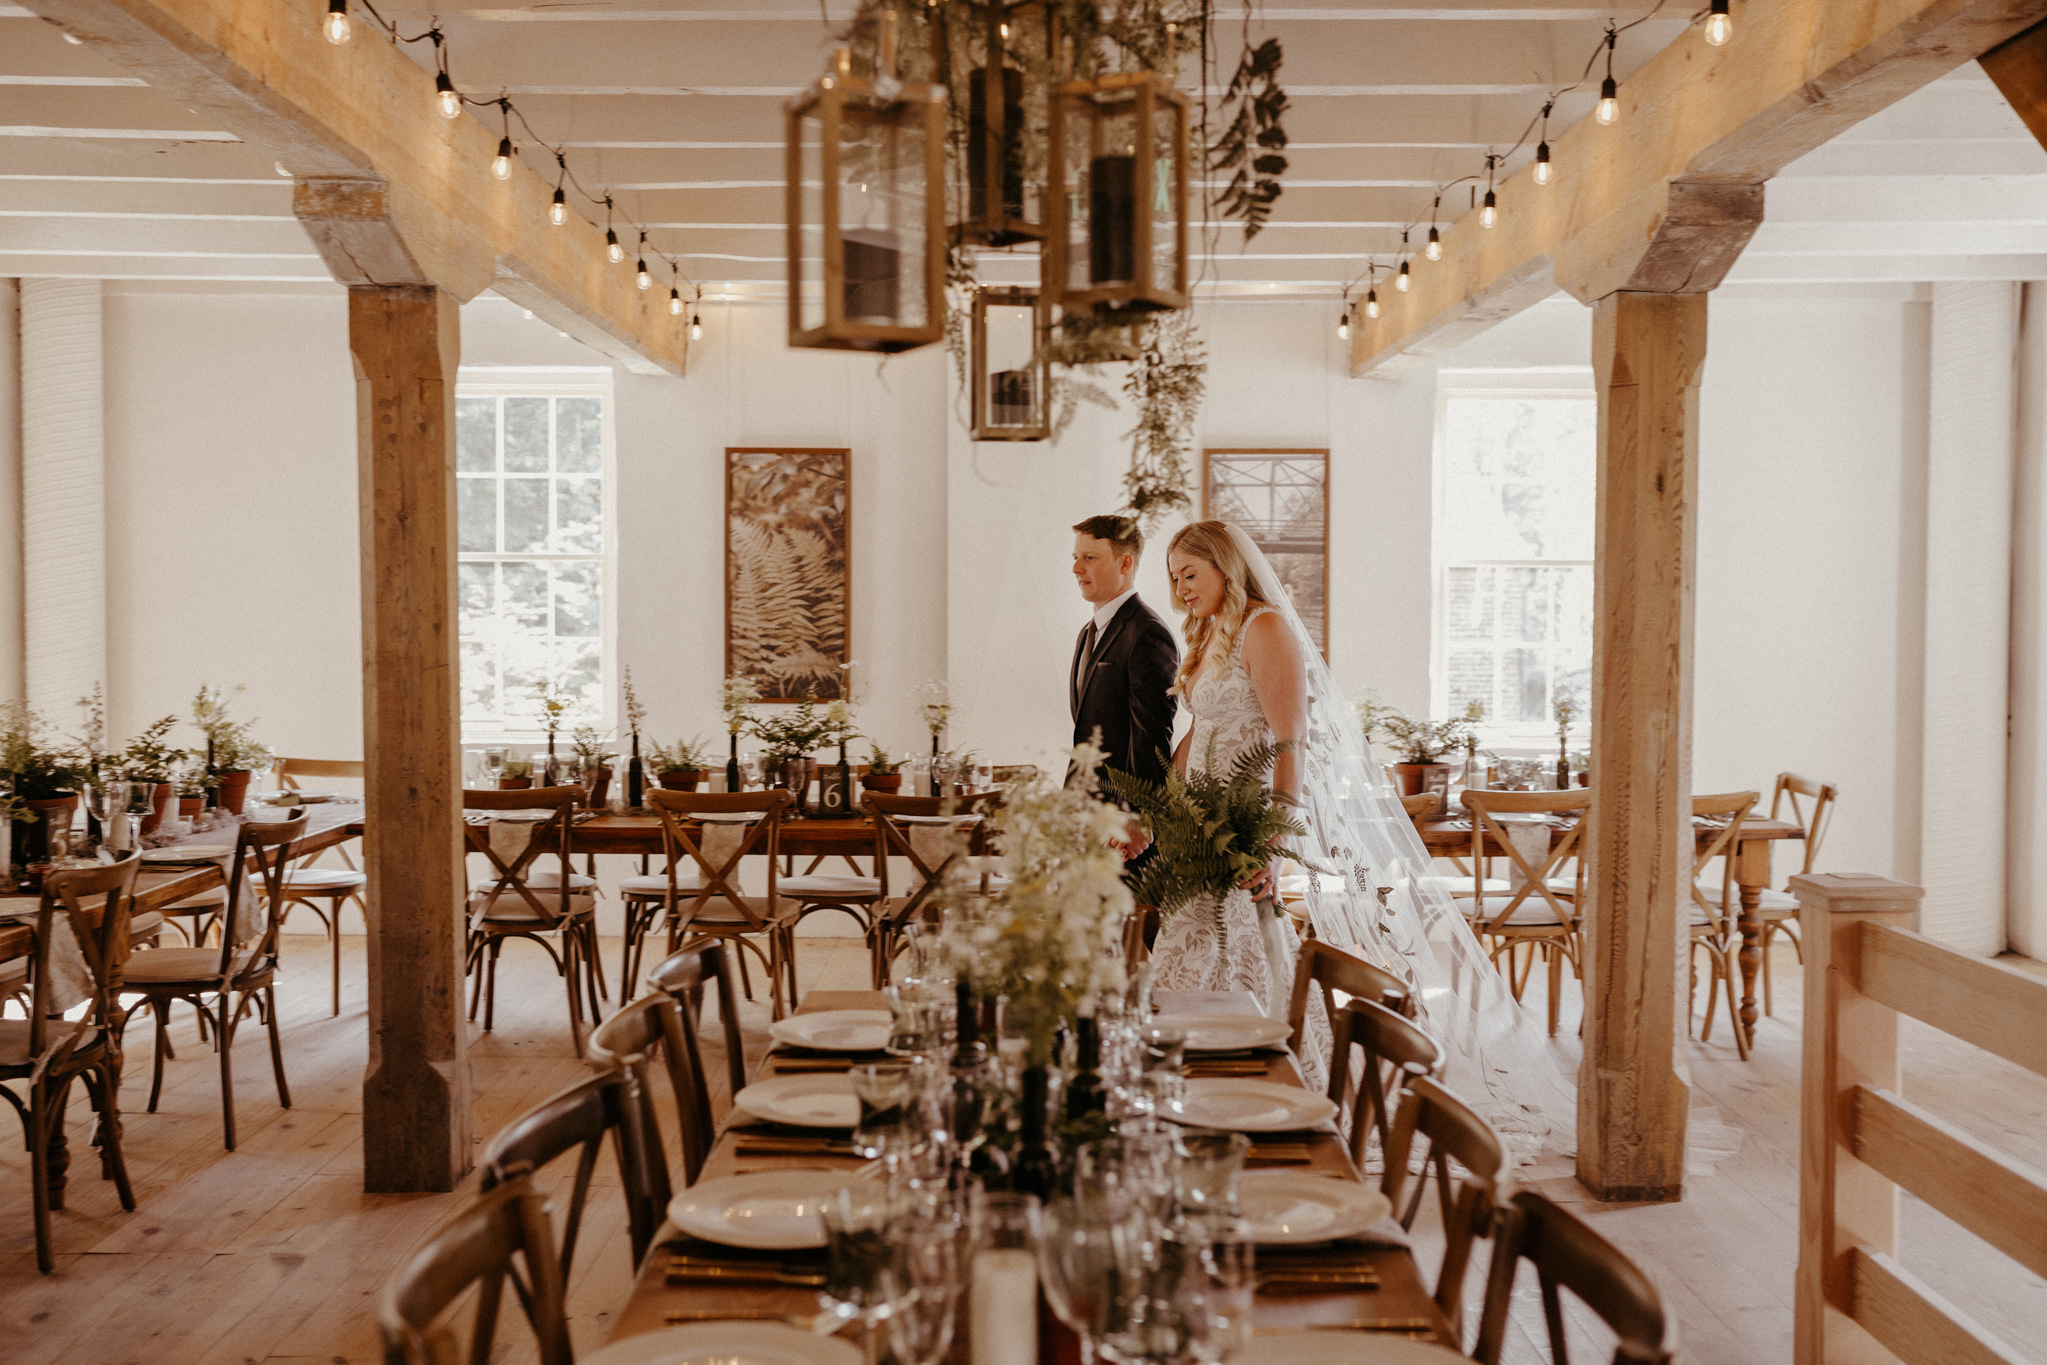 Summer garden party wedding at a restored historic mill with incredible moody details and textures, maryland wedding photographer